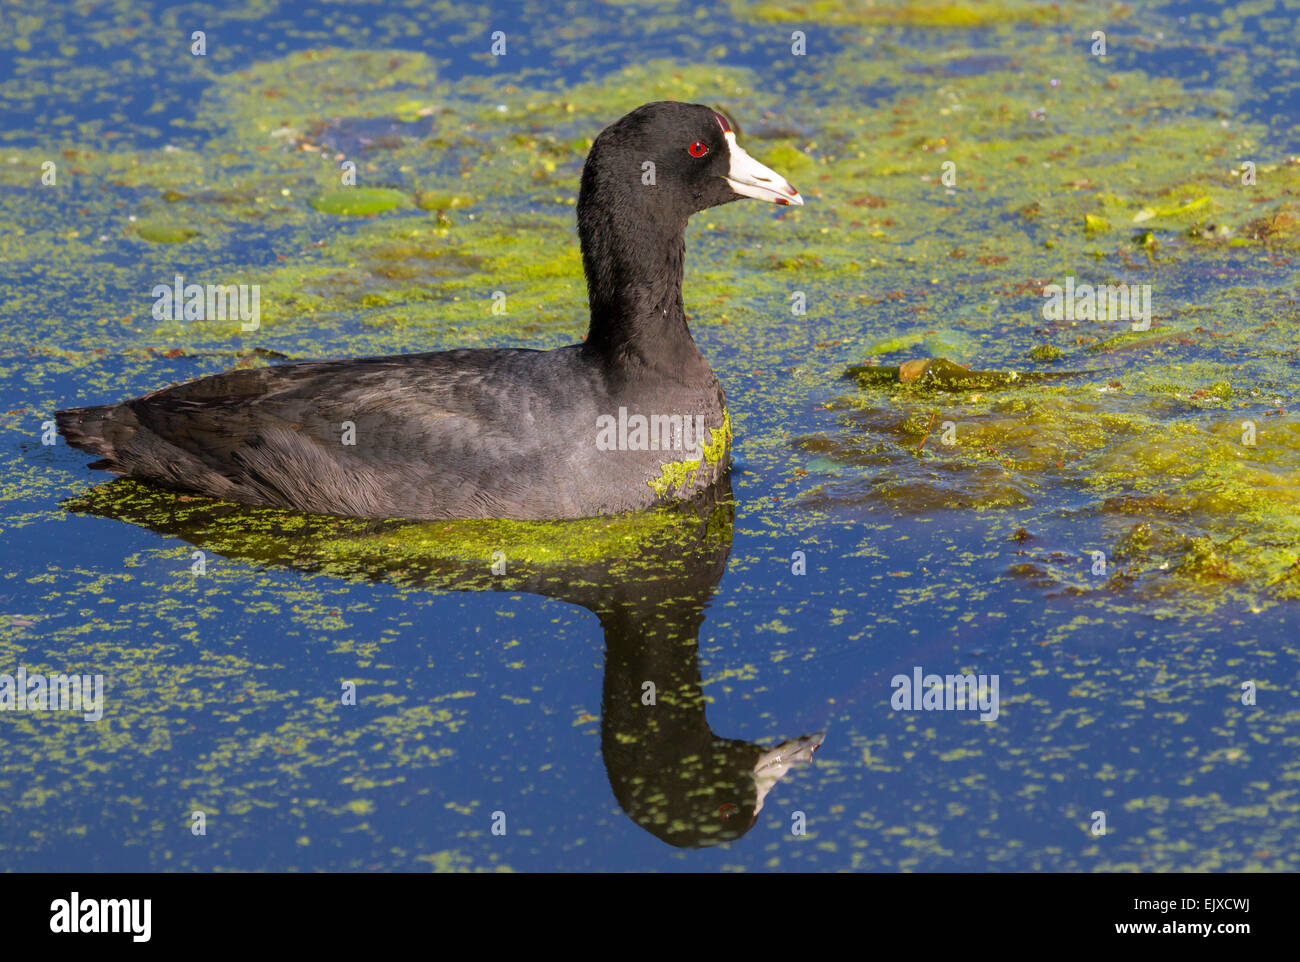 American coot (Fulica americana) in a swamp covered by duckweed, Brazos Bend state park, Needville, Texas, USA Stock Photo